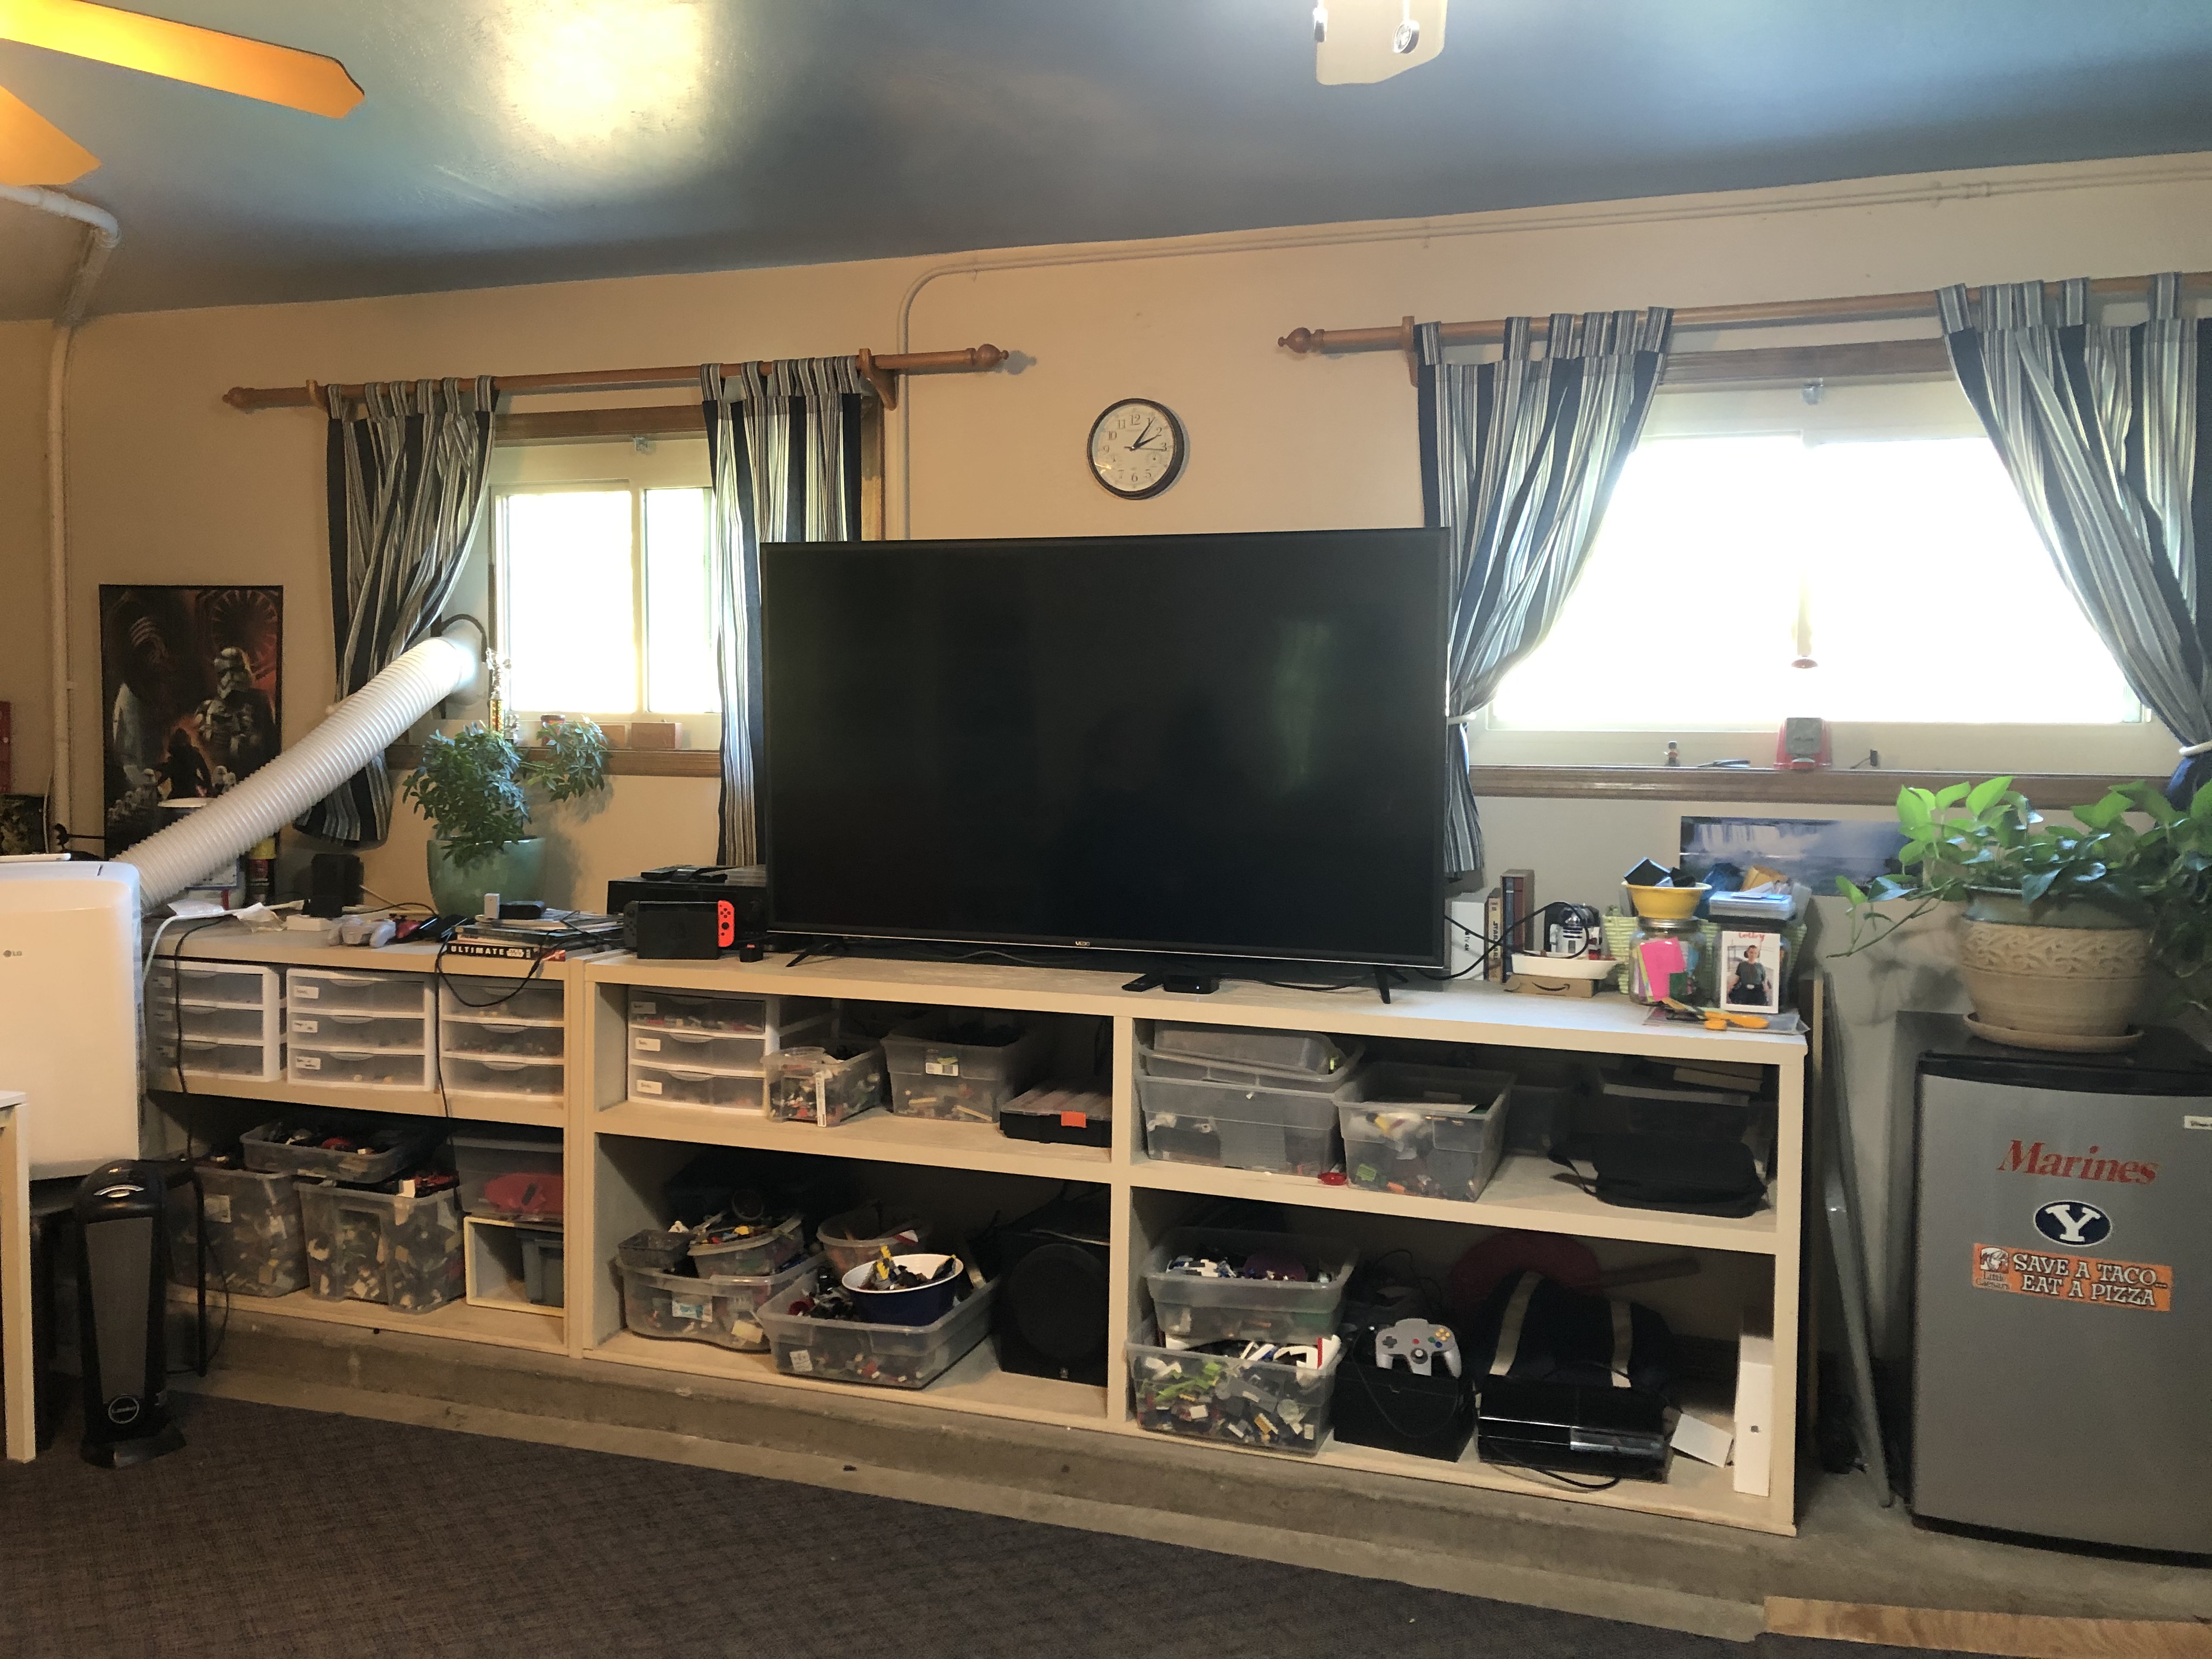 View of the Mancave's TV and LEGO shelves